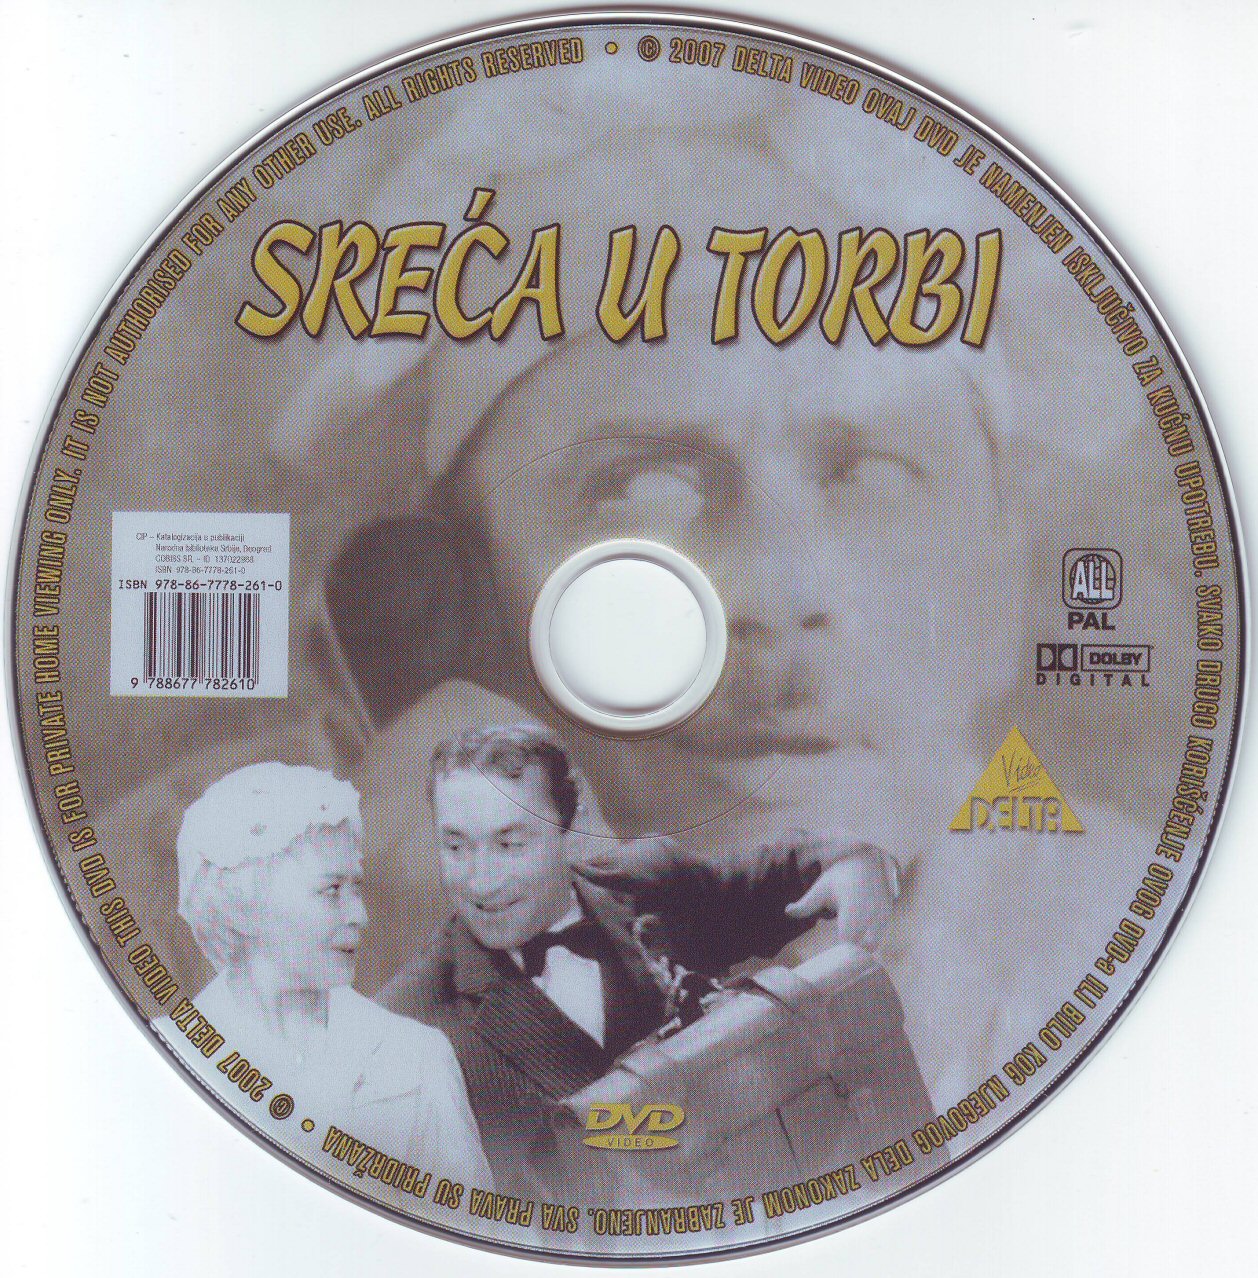 Click to view full size image -  DVD Cover - S - DVD- SRECA U TORBI - CD - DVD- SRECA U TORBI - CD.jpg